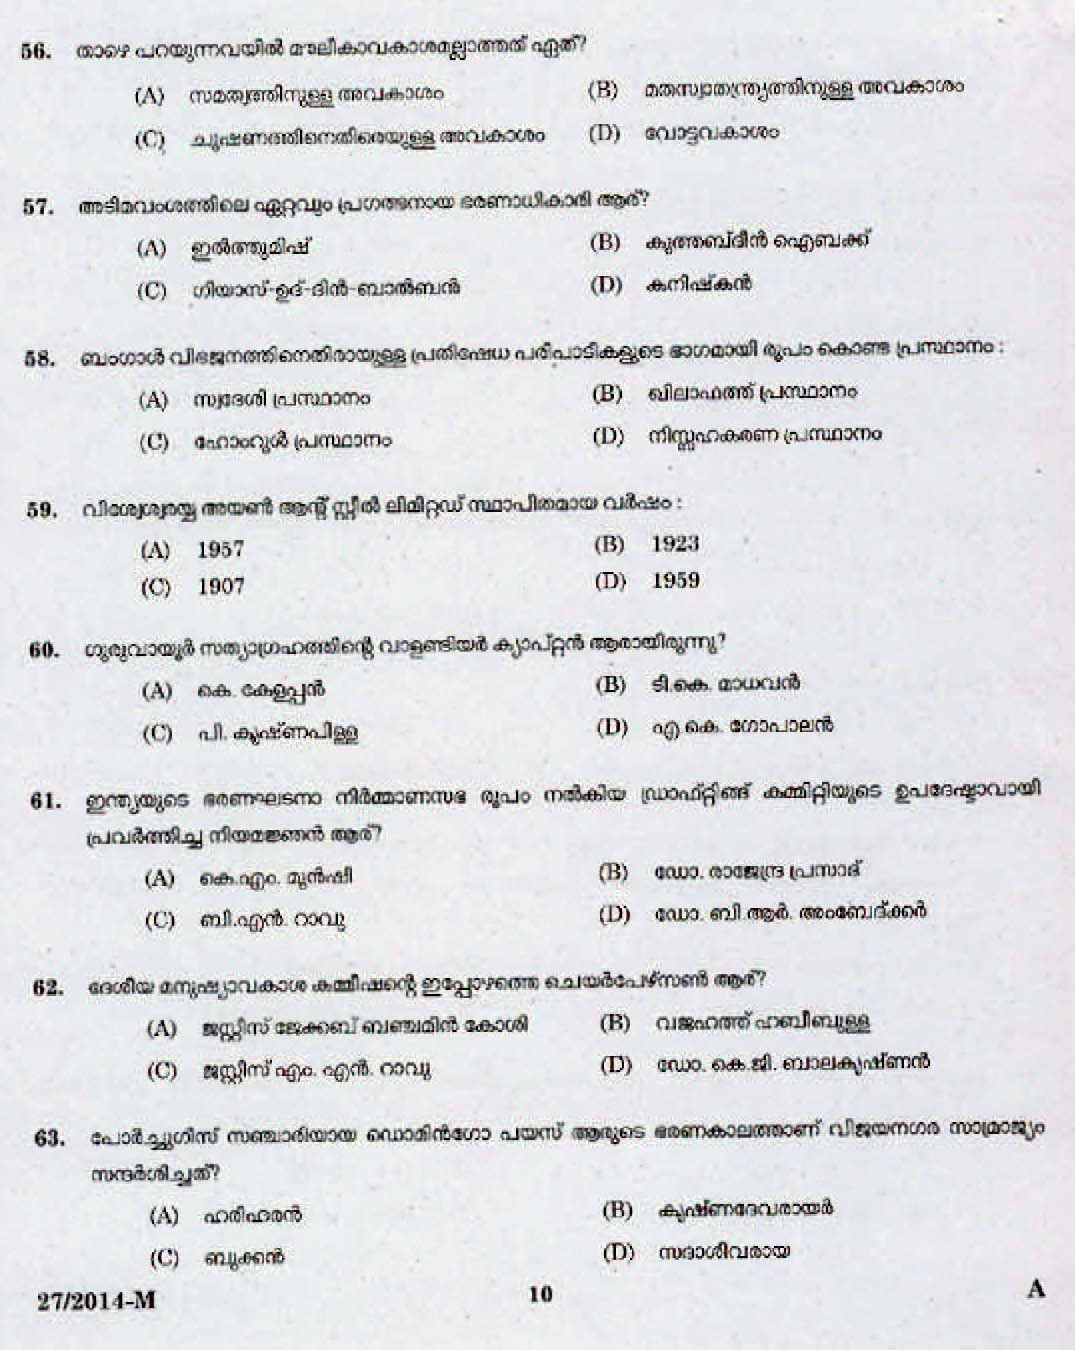 LD Clerk All Districts Question Paper Malayalam 2014 Paper Code 272014 M 8